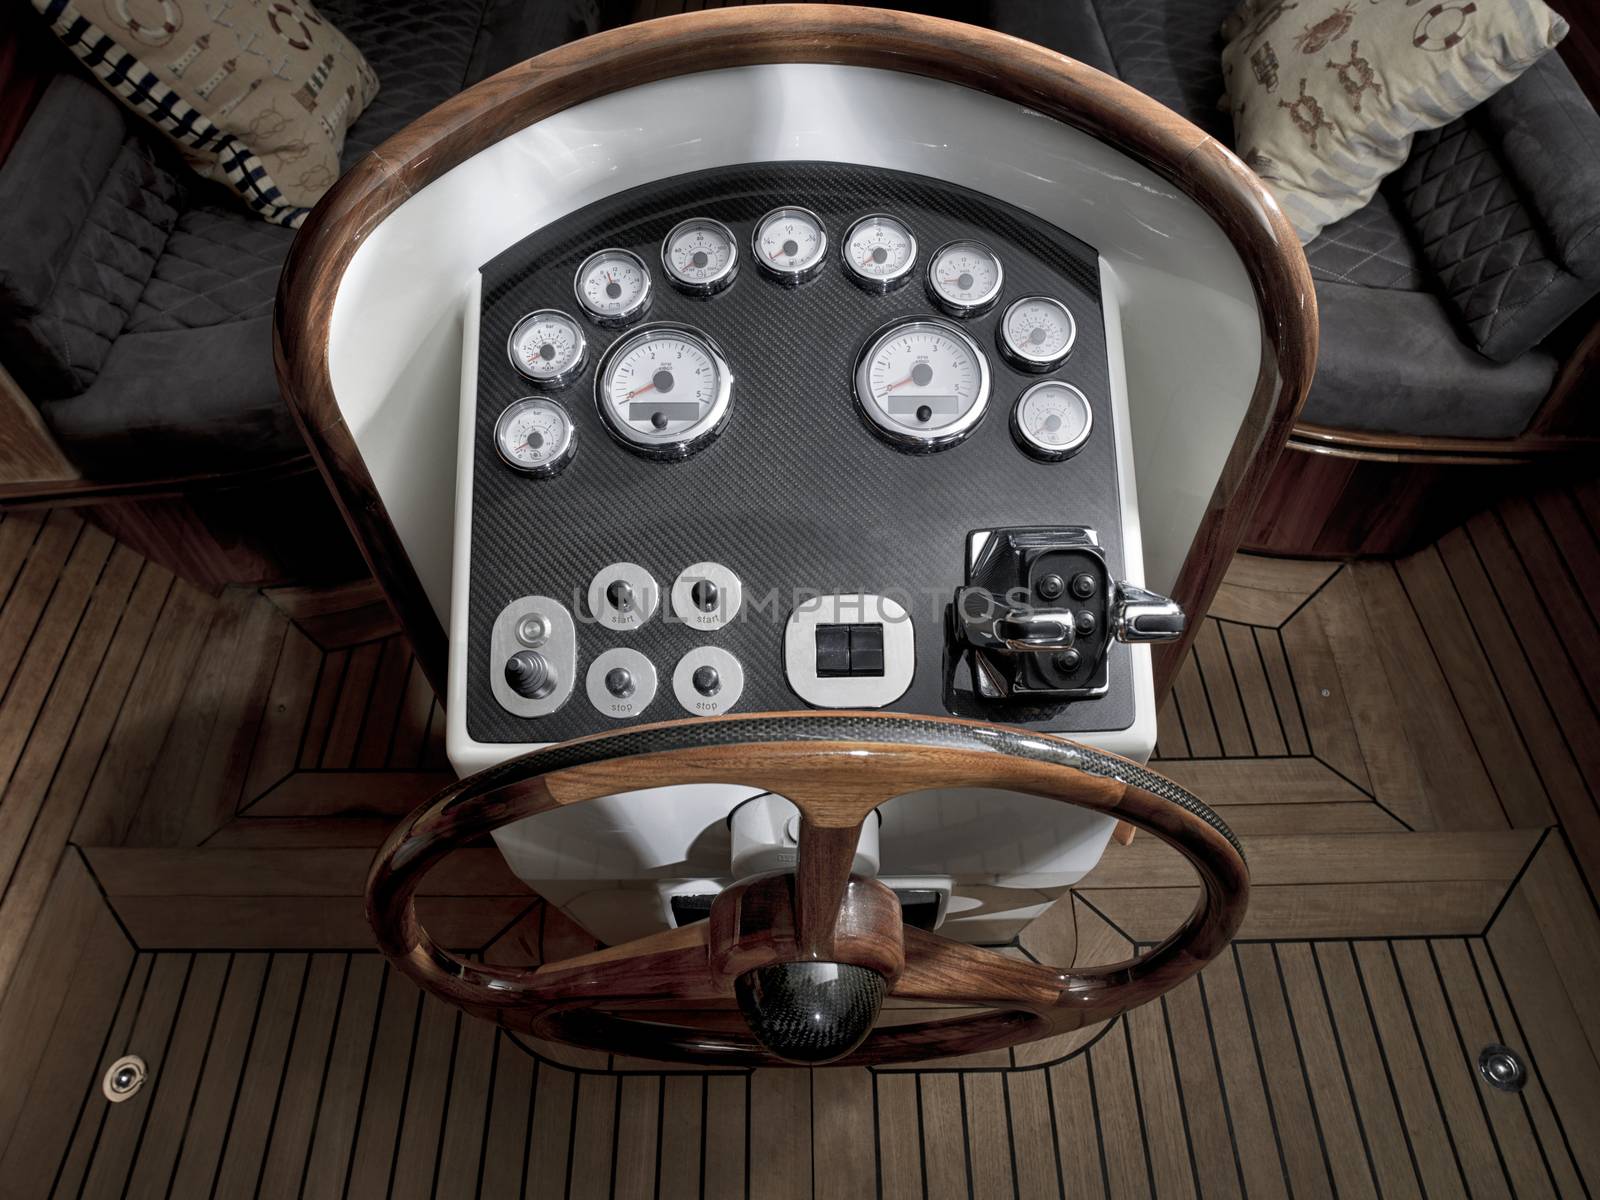 Vintage wooden boat with steering wheel and dashboard.